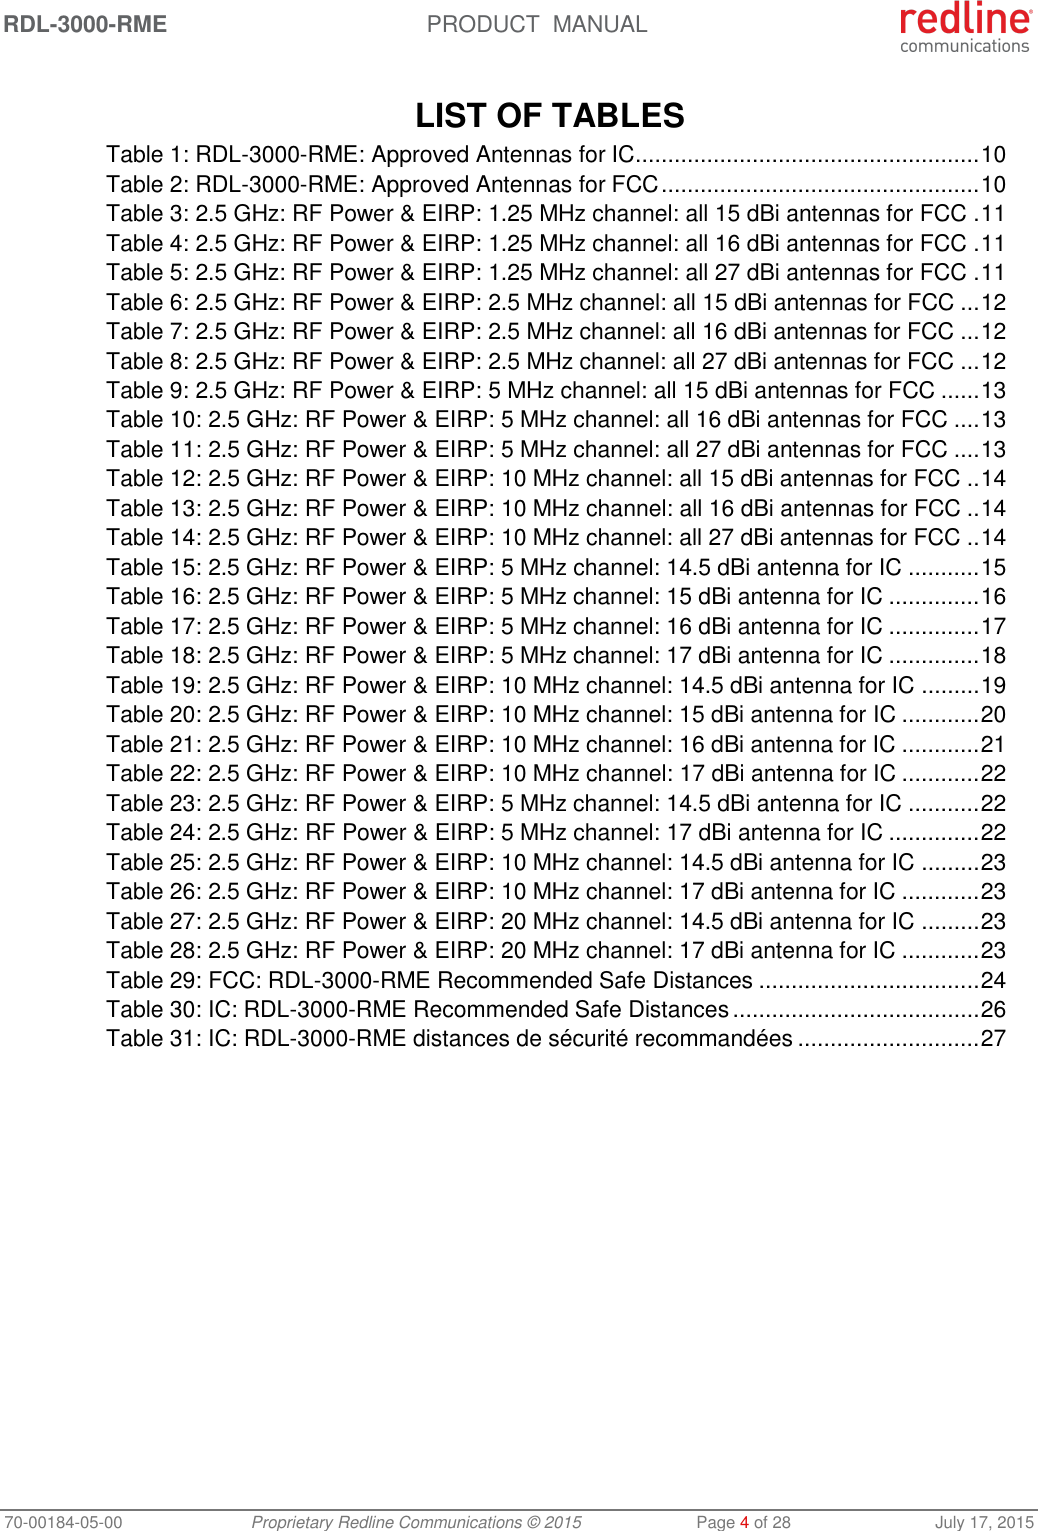 RDL-3000-RME  PRODUCT  MANUAL 70-00184-05-00 Proprietary Redline Communications © 2015  Page 4 of 28  July 17, 2015  LIST OF TABLES Table 1: RDL-3000-RME: Approved Antennas for IC ..................................................... 10 Table 2: RDL-3000-RME: Approved Antennas for FCC ................................................. 10 Table 3: 2.5 GHz: RF Power &amp; EIRP: 1.25 MHz channel: all 15 dBi antennas for FCC . 11 Table 4: 2.5 GHz: RF Power &amp; EIRP: 1.25 MHz channel: all 16 dBi antennas for FCC . 11 Table 5: 2.5 GHz: RF Power &amp; EIRP: 1.25 MHz channel: all 27 dBi antennas for FCC . 11 Table 6: 2.5 GHz: RF Power &amp; EIRP: 2.5 MHz channel: all 15 dBi antennas for FCC ... 12 Table 7: 2.5 GHz: RF Power &amp; EIRP: 2.5 MHz channel: all 16 dBi antennas for FCC ... 12 Table 8: 2.5 GHz: RF Power &amp; EIRP: 2.5 MHz channel: all 27 dBi antennas for FCC ... 12 Table 9: 2.5 GHz: RF Power &amp; EIRP: 5 MHz channel: all 15 dBi antennas for FCC ...... 13 Table 10: 2.5 GHz: RF Power &amp; EIRP: 5 MHz channel: all 16 dBi antennas for FCC .... 13 Table 11: 2.5 GHz: RF Power &amp; EIRP: 5 MHz channel: all 27 dBi antennas for FCC .... 13 Table 12: 2.5 GHz: RF Power &amp; EIRP: 10 MHz channel: all 15 dBi antennas for FCC .. 14 Table 13: 2.5 GHz: RF Power &amp; EIRP: 10 MHz channel: all 16 dBi antennas for FCC .. 14 Table 14: 2.5 GHz: RF Power &amp; EIRP: 10 MHz channel: all 27 dBi antennas for FCC .. 14 Table 15: 2.5 GHz: RF Power &amp; EIRP: 5 MHz channel: 14.5 dBi antenna for IC ........... 15 Table 16: 2.5 GHz: RF Power &amp; EIRP: 5 MHz channel: 15 dBi antenna for IC .............. 16 Table 17: 2.5 GHz: RF Power &amp; EIRP: 5 MHz channel: 16 dBi antenna for IC .............. 17 Table 18: 2.5 GHz: RF Power &amp; EIRP: 5 MHz channel: 17 dBi antenna for IC .............. 18 Table 19: 2.5 GHz: RF Power &amp; EIRP: 10 MHz channel: 14.5 dBi antenna for IC ......... 19 Table 20: 2.5 GHz: RF Power &amp; EIRP: 10 MHz channel: 15 dBi antenna for IC ............ 20 Table 21: 2.5 GHz: RF Power &amp; EIRP: 10 MHz channel: 16 dBi antenna for IC ............ 21 Table 22: 2.5 GHz: RF Power &amp; EIRP: 10 MHz channel: 17 dBi antenna for IC ............ 22 Table 23: 2.5 GHz: RF Power &amp; EIRP: 5 MHz channel: 14.5 dBi antenna for IC ........... 22 Table 24: 2.5 GHz: RF Power &amp; EIRP: 5 MHz channel: 17 dBi antenna for IC .............. 22 Table 25: 2.5 GHz: RF Power &amp; EIRP: 10 MHz channel: 14.5 dBi antenna for IC ......... 23 Table 26: 2.5 GHz: RF Power &amp; EIRP: 10 MHz channel: 17 dBi antenna for IC ............ 23 Table 27: 2.5 GHz: RF Power &amp; EIRP: 20 MHz channel: 14.5 dBi antenna for IC ......... 23 Table 28: 2.5 GHz: RF Power &amp; EIRP: 20 MHz channel: 17 dBi antenna for IC ............ 23 Table 29: FCC: RDL-3000-RME Recommended Safe Distances .................................. 24 Table 30: IC: RDL-3000-RME Recommended Safe Distances ...................................... 26 Table 31: IC: RDL-3000-RME distances de sécurité recommandées ............................ 27 